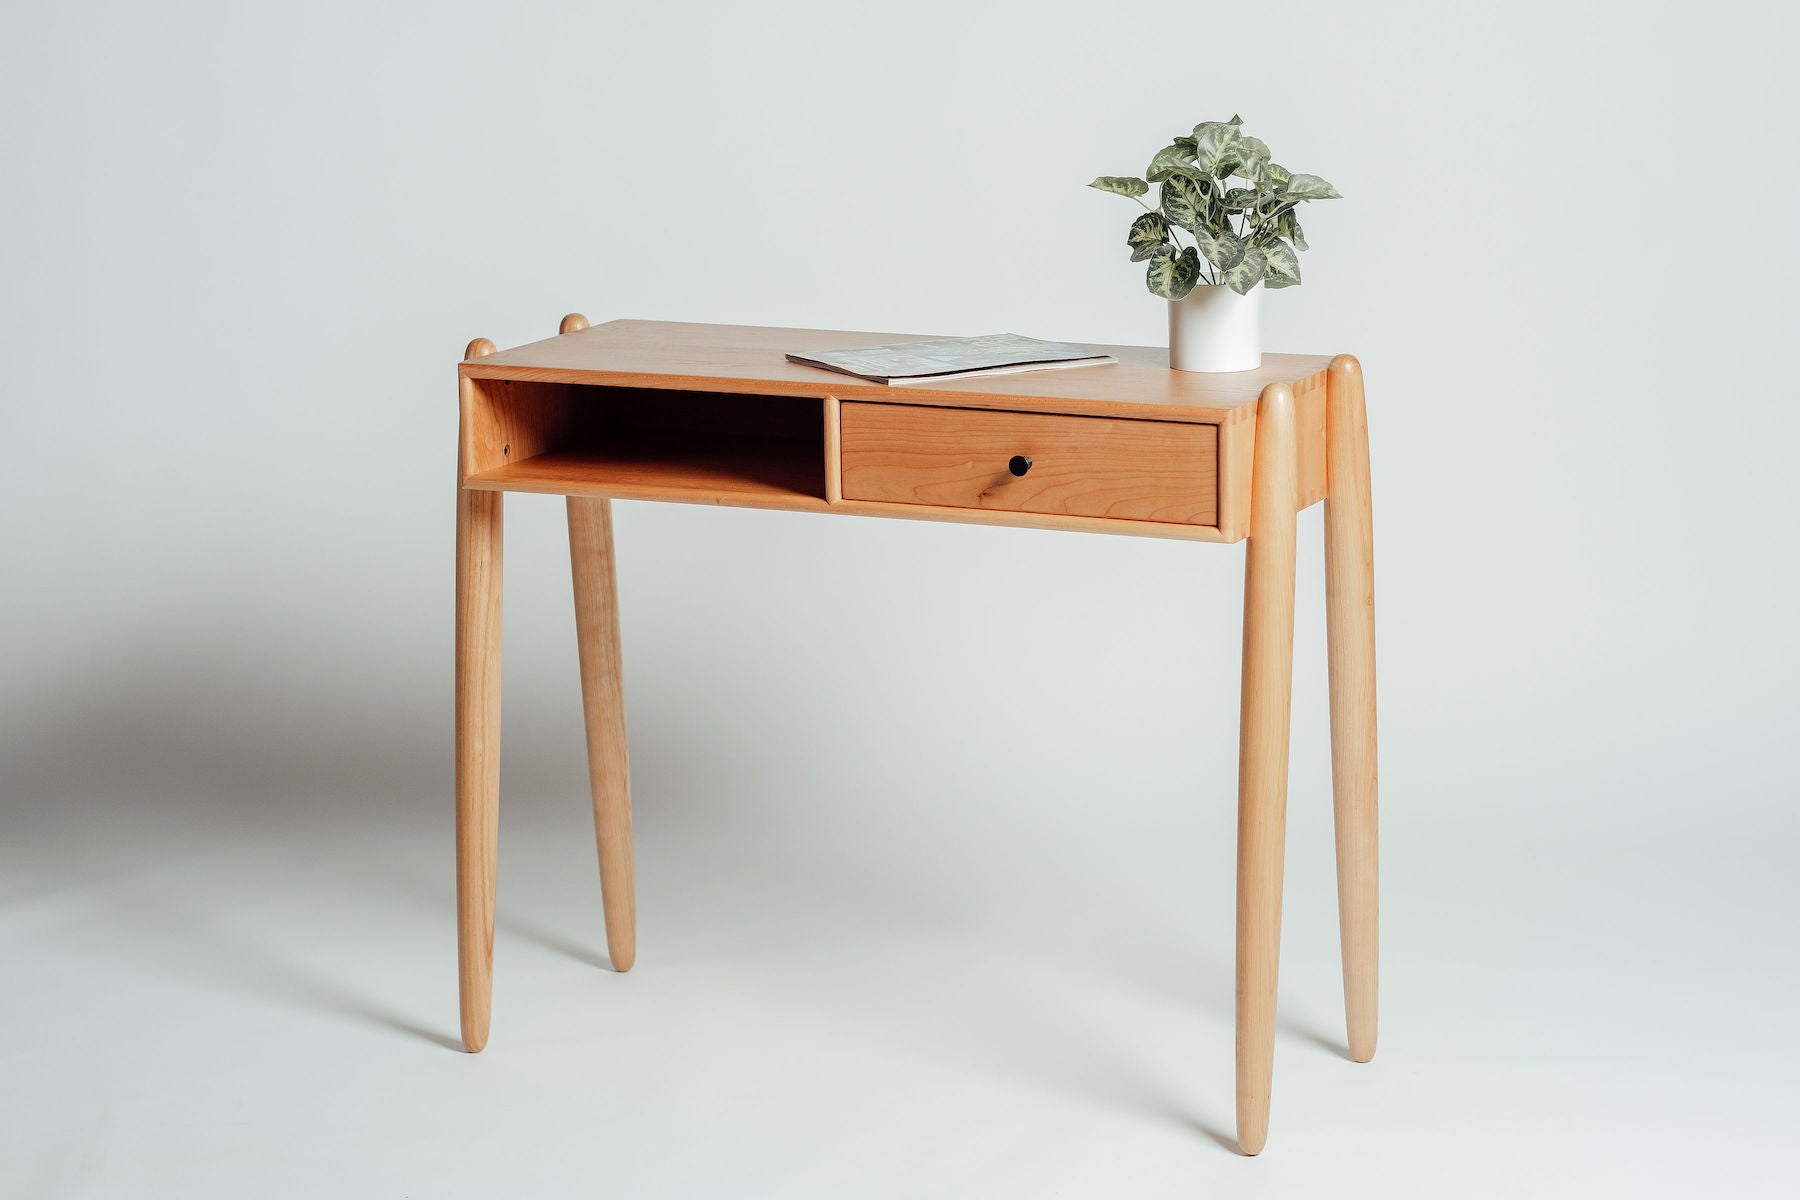 Solomon midcentury modern cherry wood Console Desk handcrafted by Hunt & Noyer in Michigan